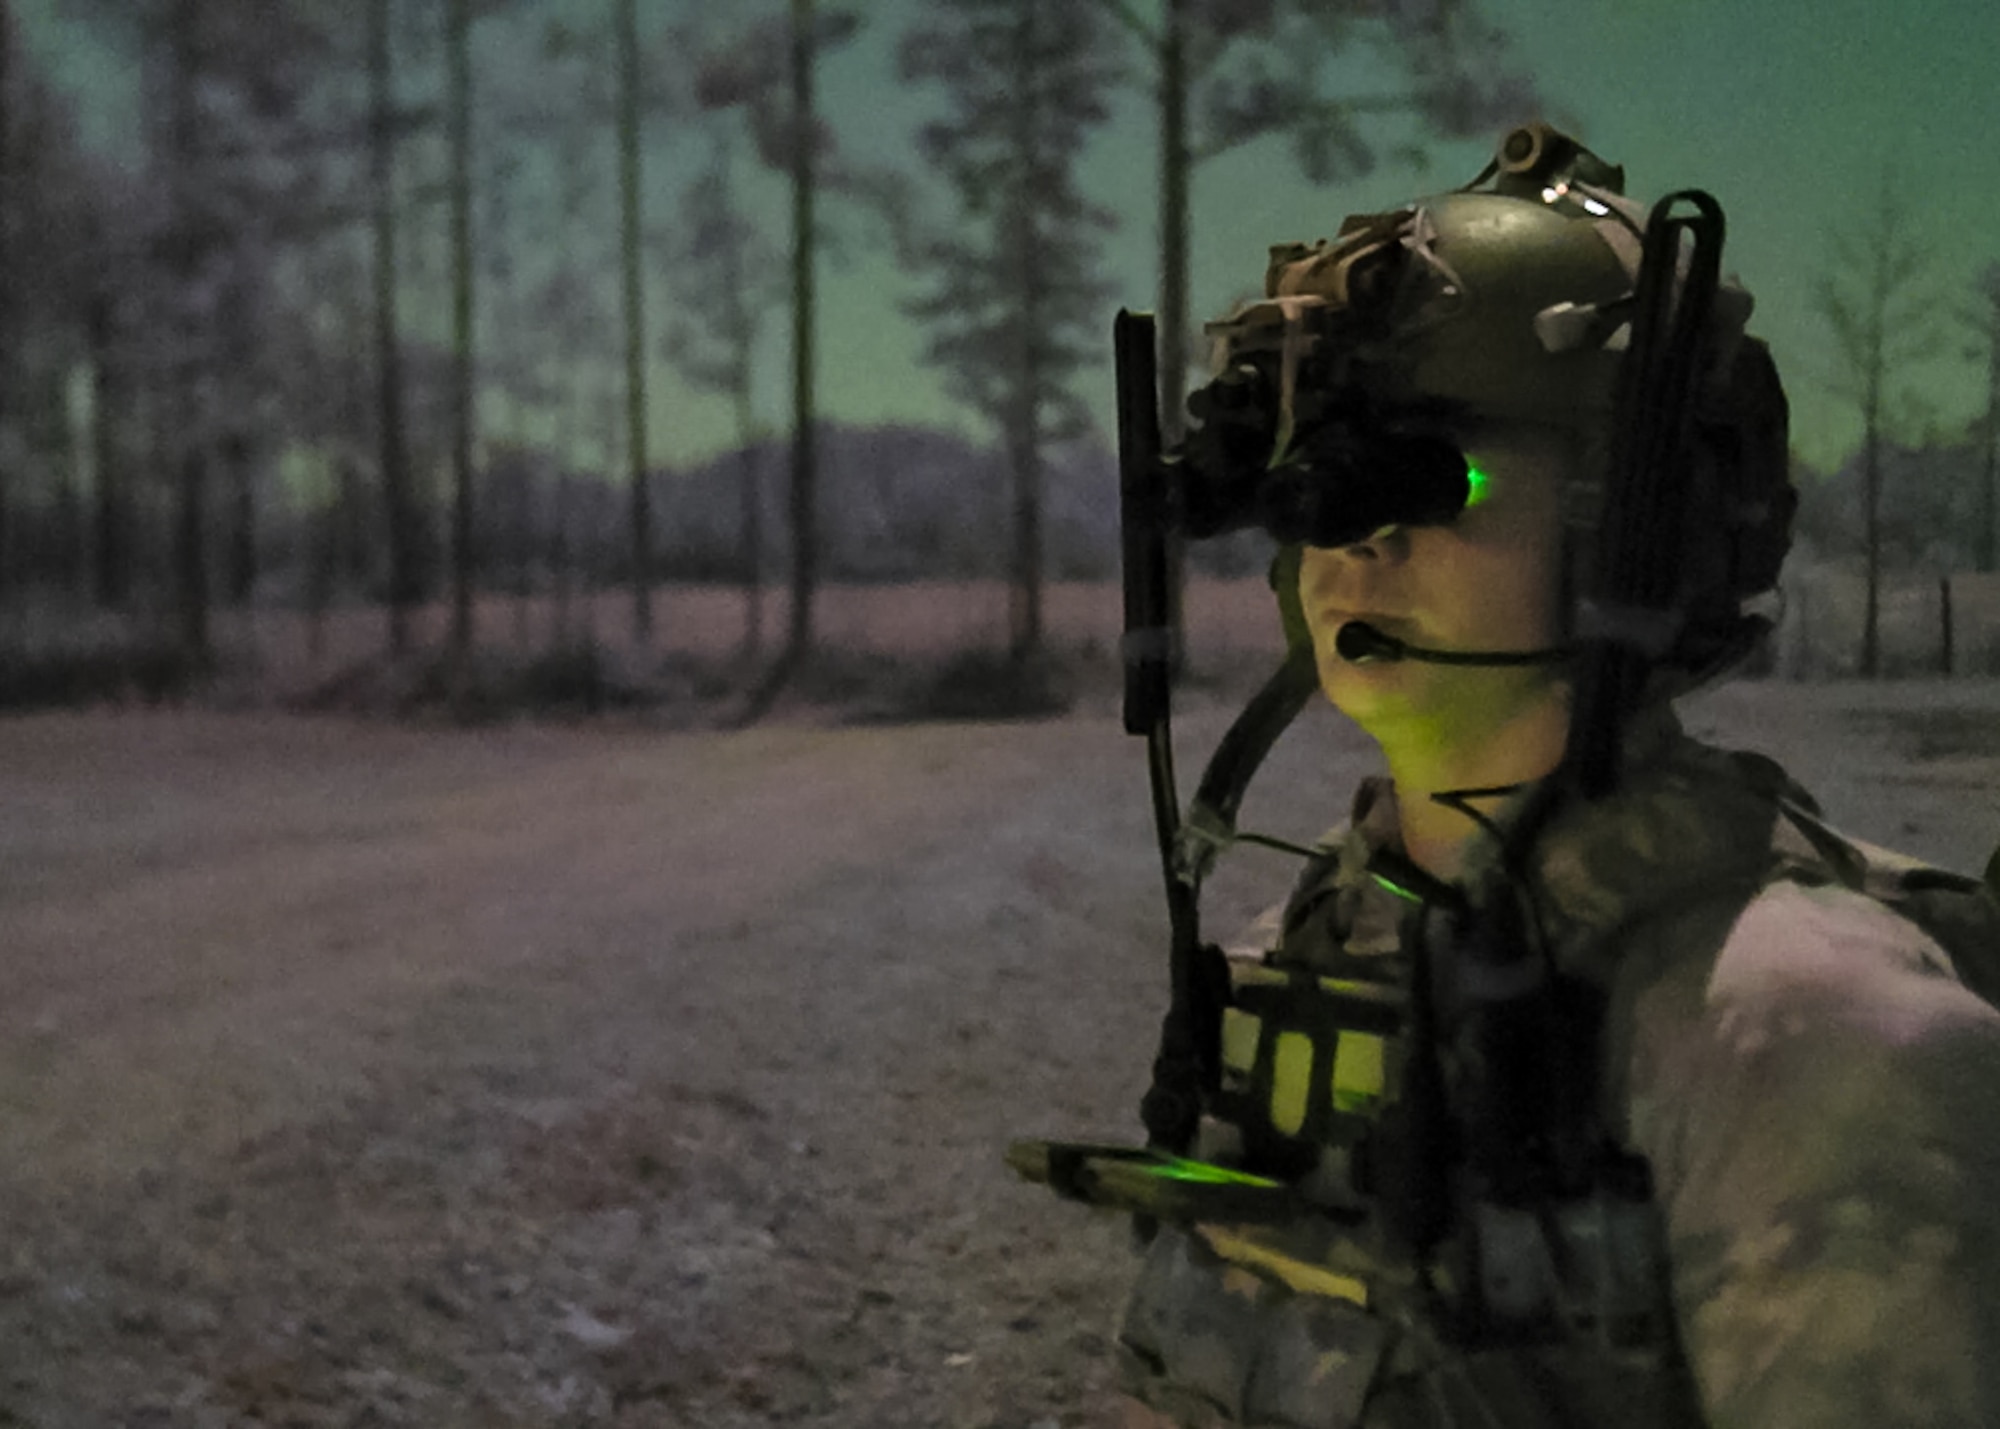 A U.S. Air Force Special Tactics operator assigned to the 24th Special Operations Wing surveys an exercise mission zone during Emerald Warrior 21.1, Feb. 22, 2021, at Camp Shelby, Mississippi. Emerald Warrior is the largest joint special operations exercise involving U.S. Special Operations Command forces training to respond to various threats across the spectrum of conflict. (U.S. Air Force photo by Staff Sgt. Gabriel Macdonald)